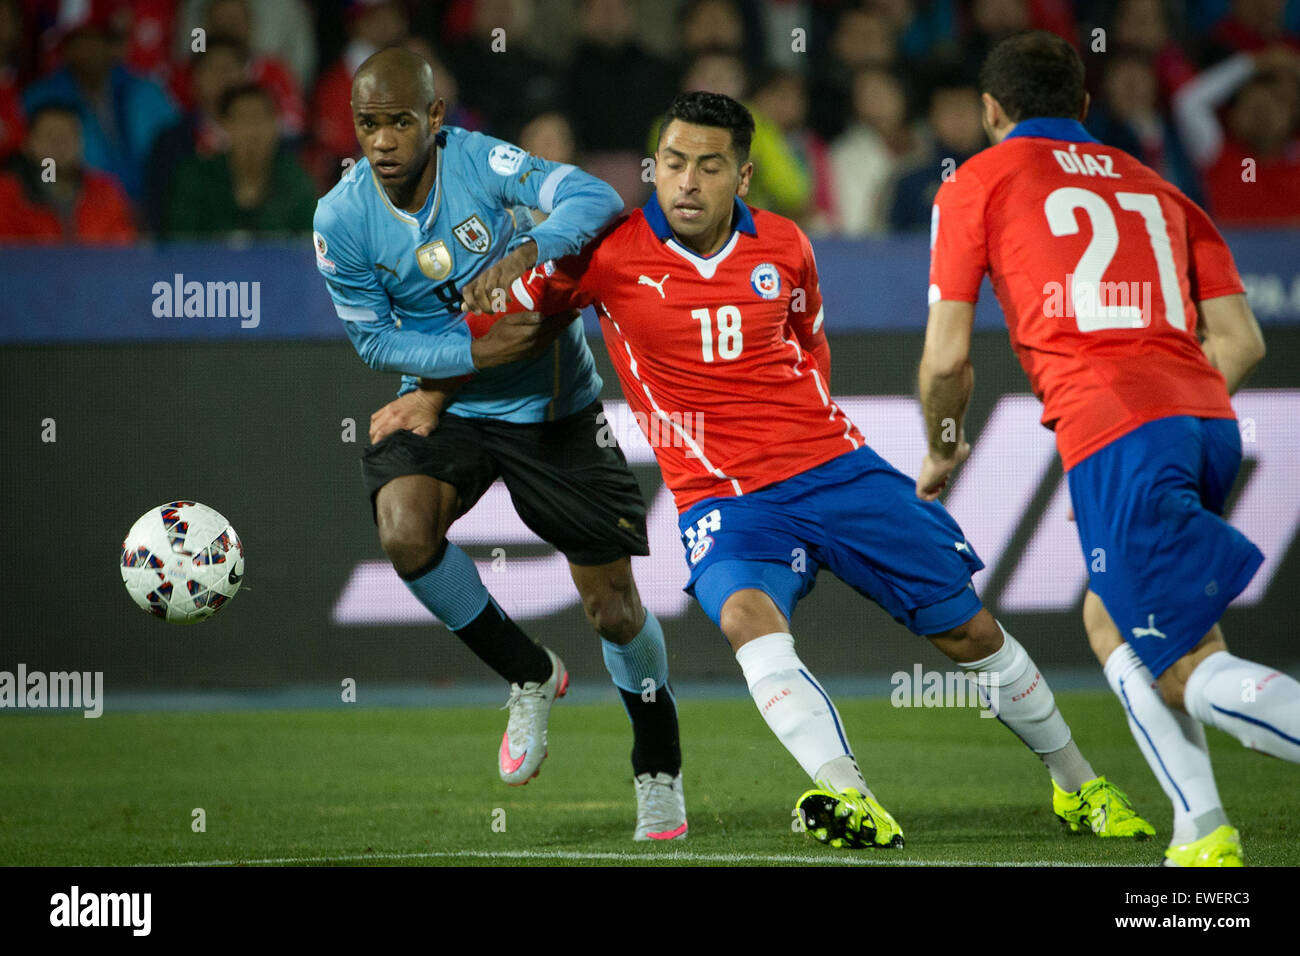 Santiago, Chile. 24th June, 2015. Gonzalo Jara (C) of Chile vies with Diego Rolan (L) of Uruguay during their quarterfinal at 2015 Copa America in Santiago, Chile, on June 24, 2015. Chile won 1-0. Credit:  Pedro Mera/Xinhua/Alamy Live News Stock Photo